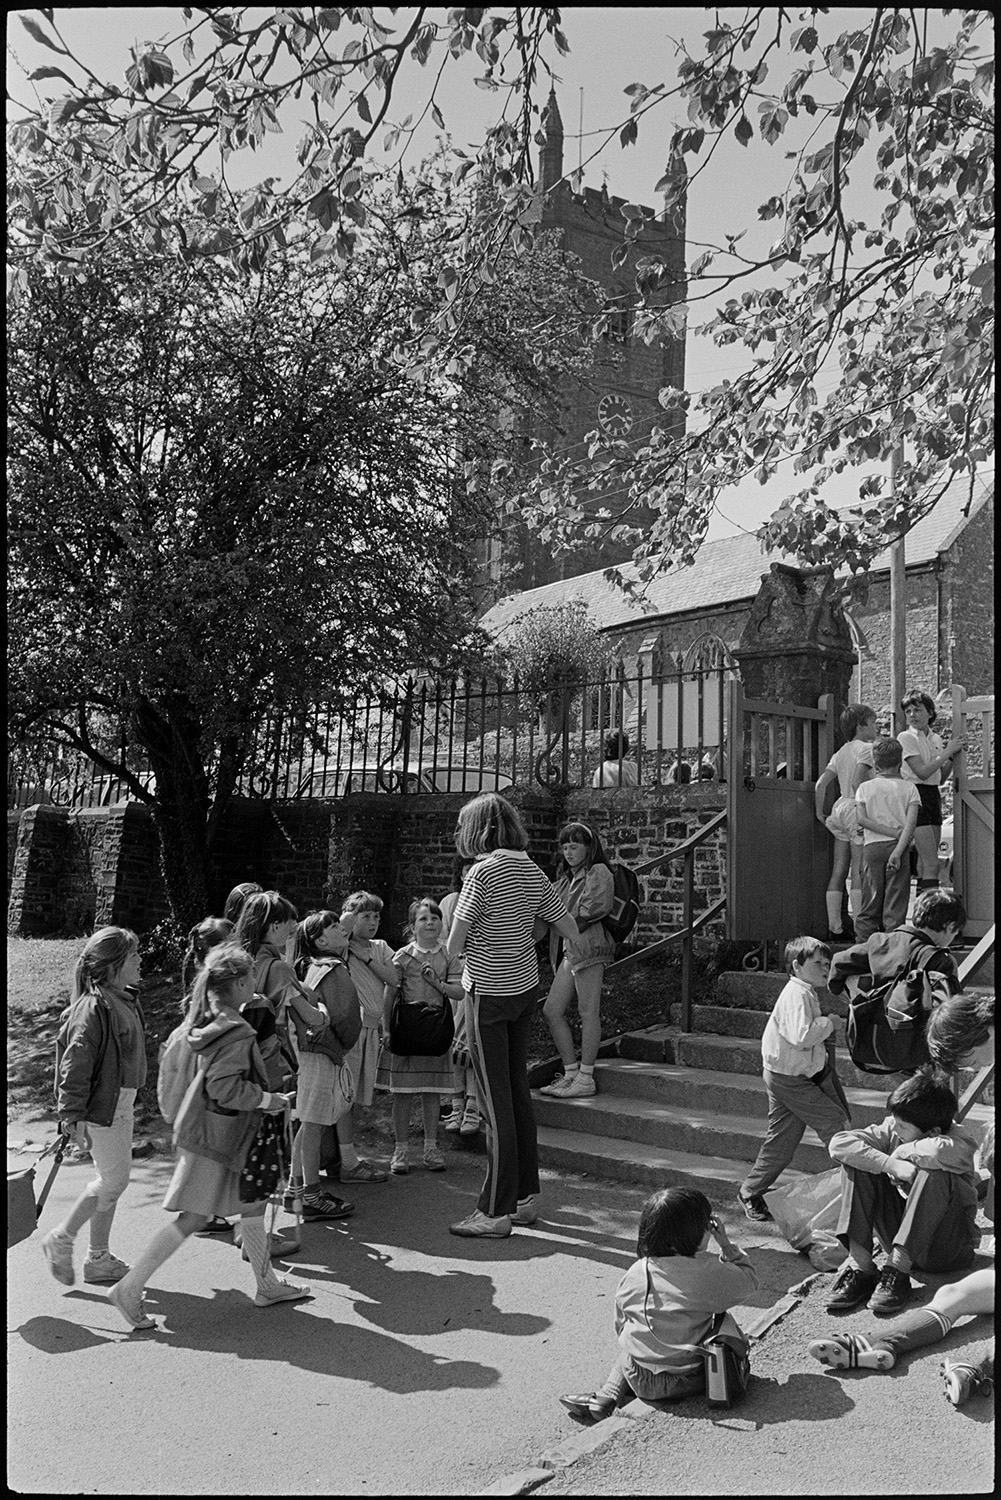 Children coming out of school. Going through cobbled streets in crocodile. Church tower.
[Children waiting and chatting at the steps by the school gate of Chulmleigh Primary School, opposite the Church which is visible in the background. Rowena Hoare, a teacher, is talking to the children.]